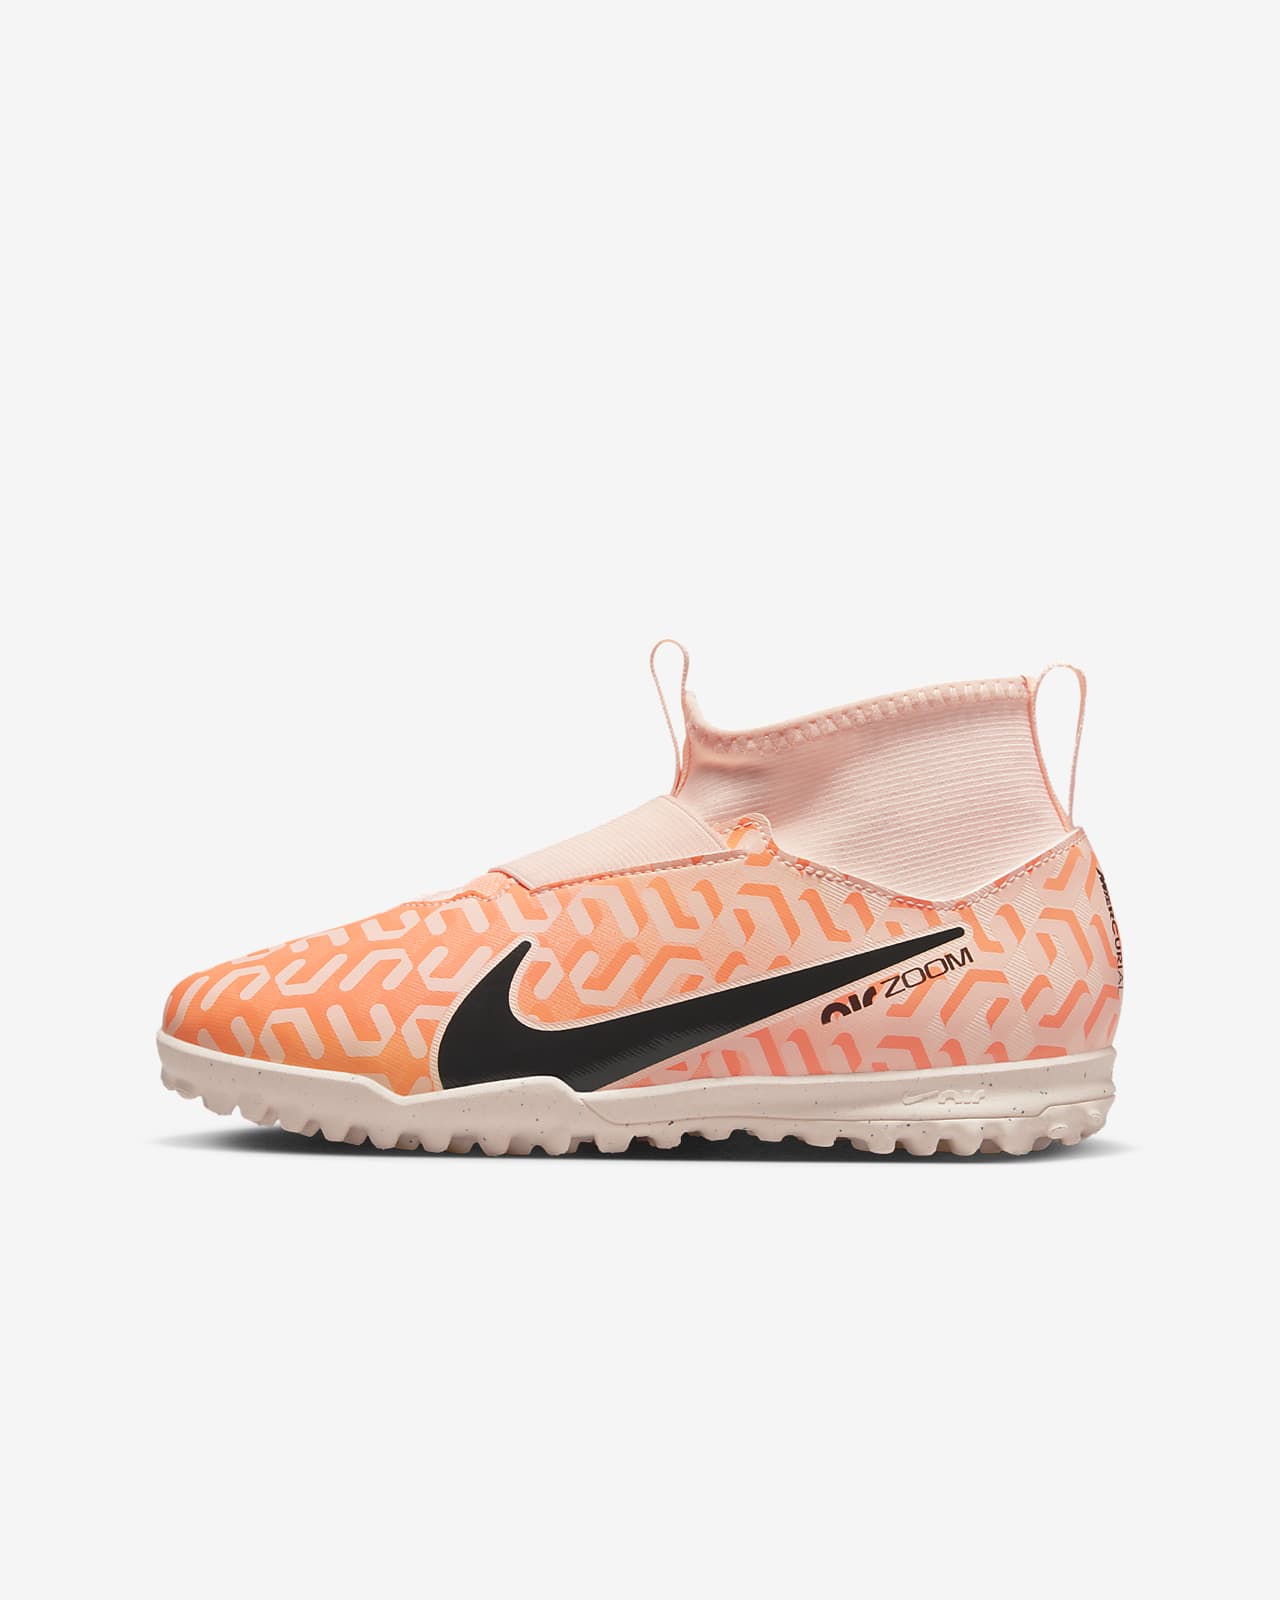 Women's Out of Your Control Sneakers in Orange Size 7 by Fashion Nova